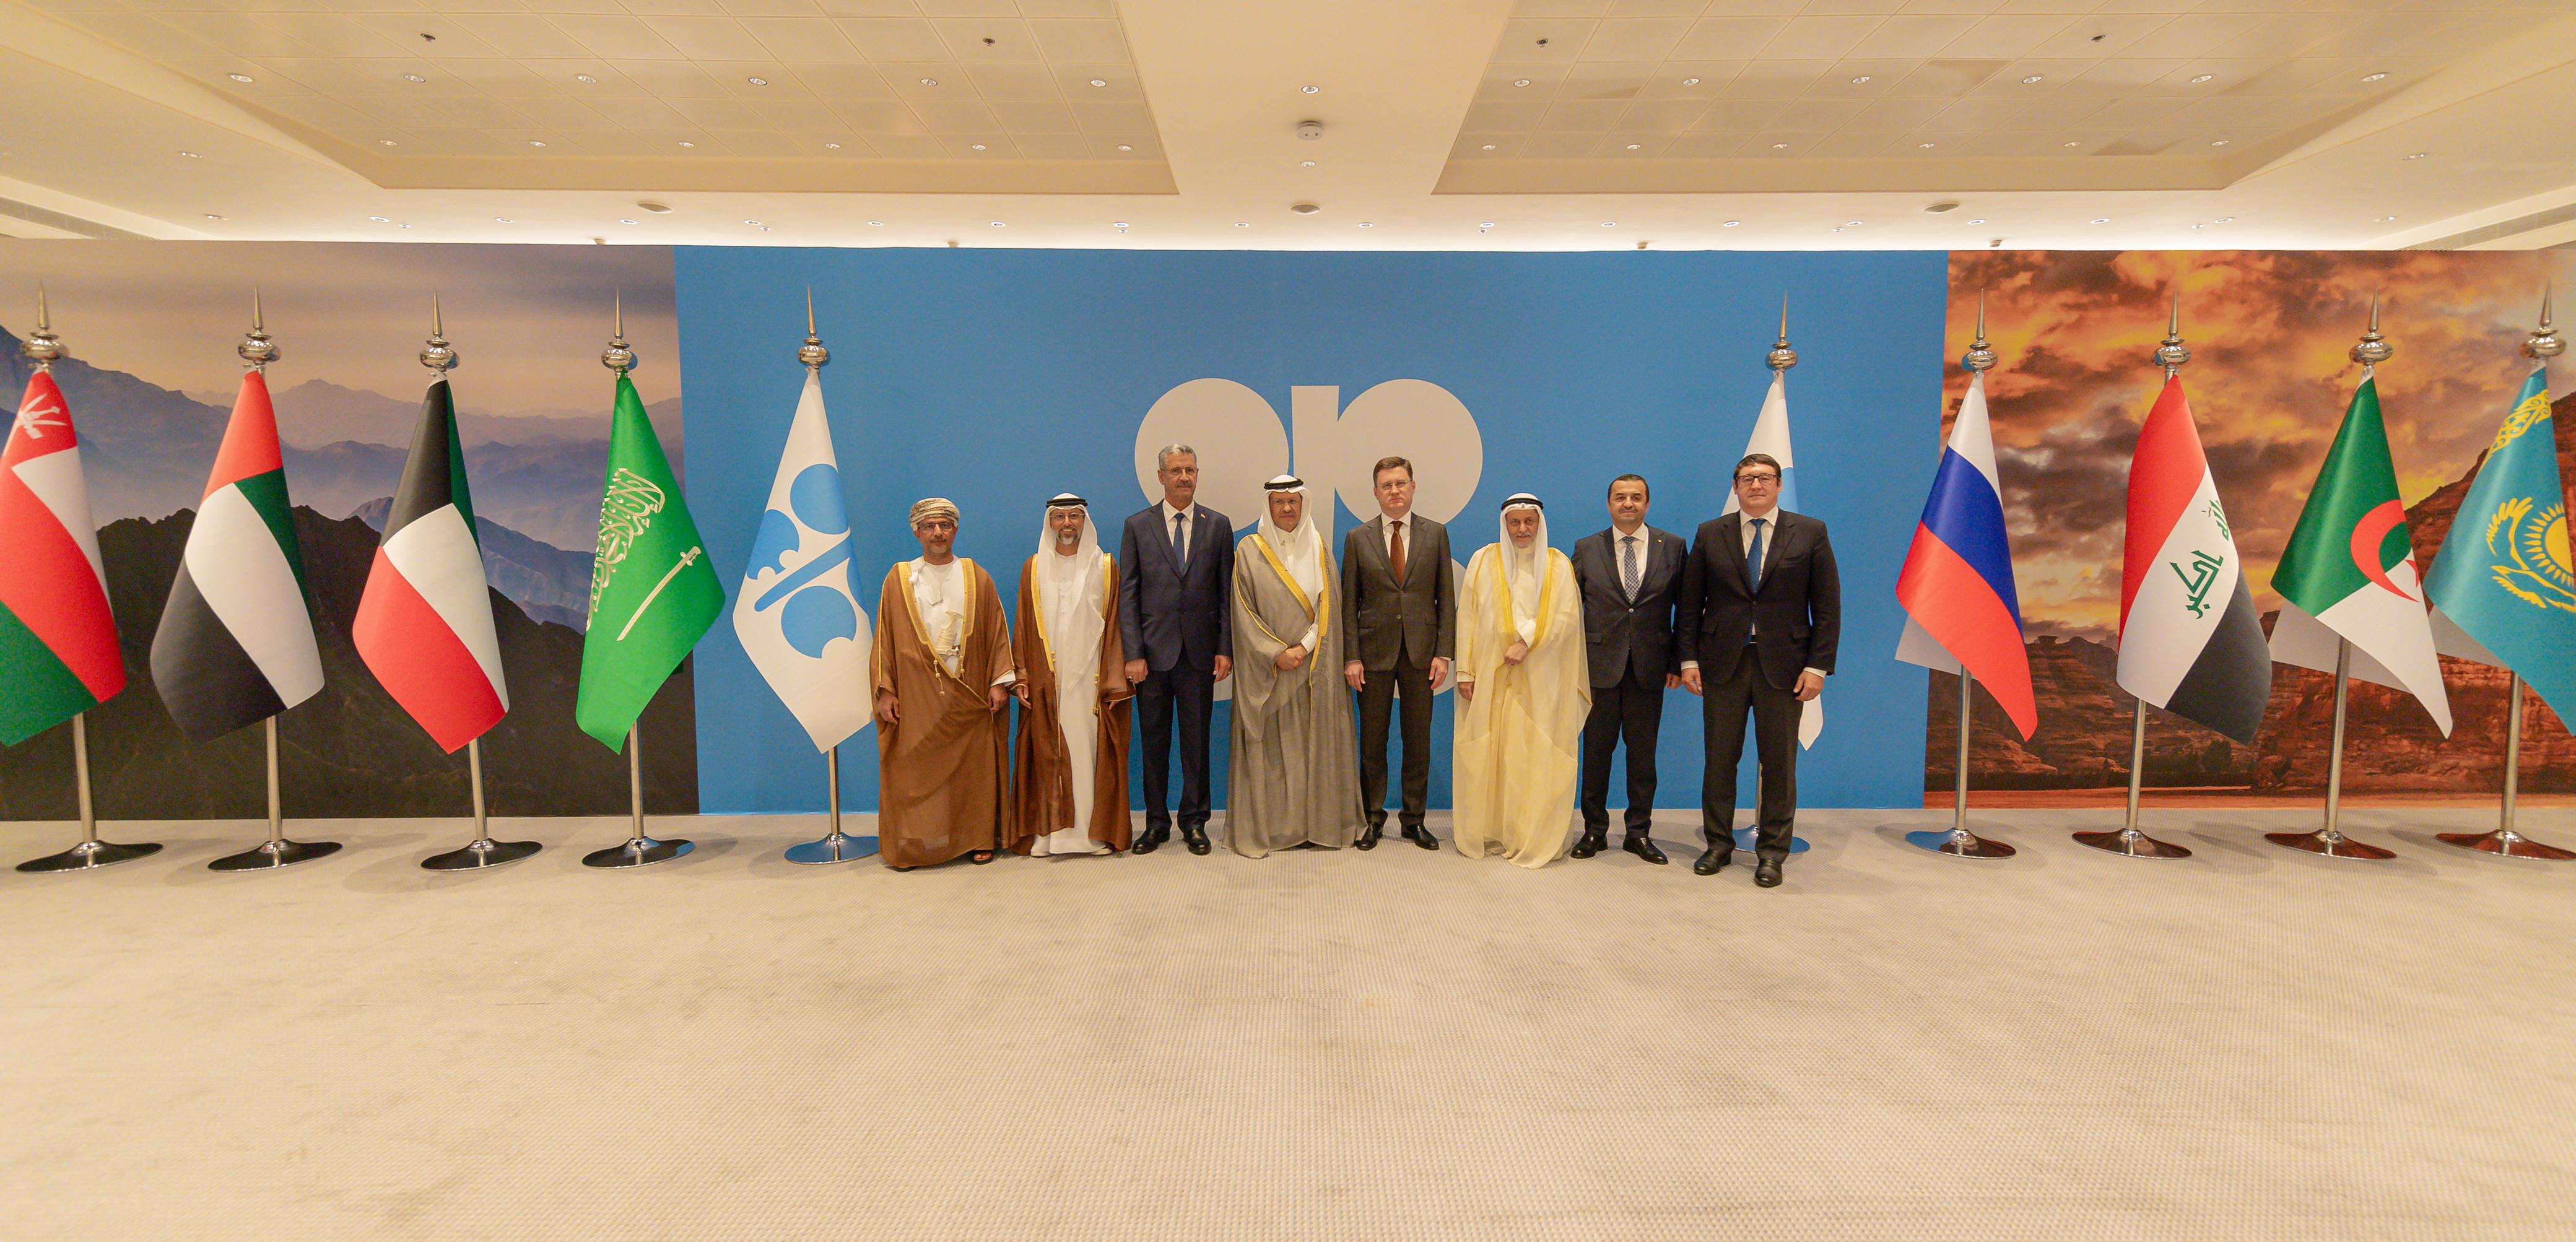 Saudi Arabia, Russia, Iraq, the United Arab Emirates, Kuwait, Kazakhstan, Algeria, and Oman met in person in Riyadh on the sidelines of the 37th OPEC and non-OPEC Ministerial Meeting (ONOMM)